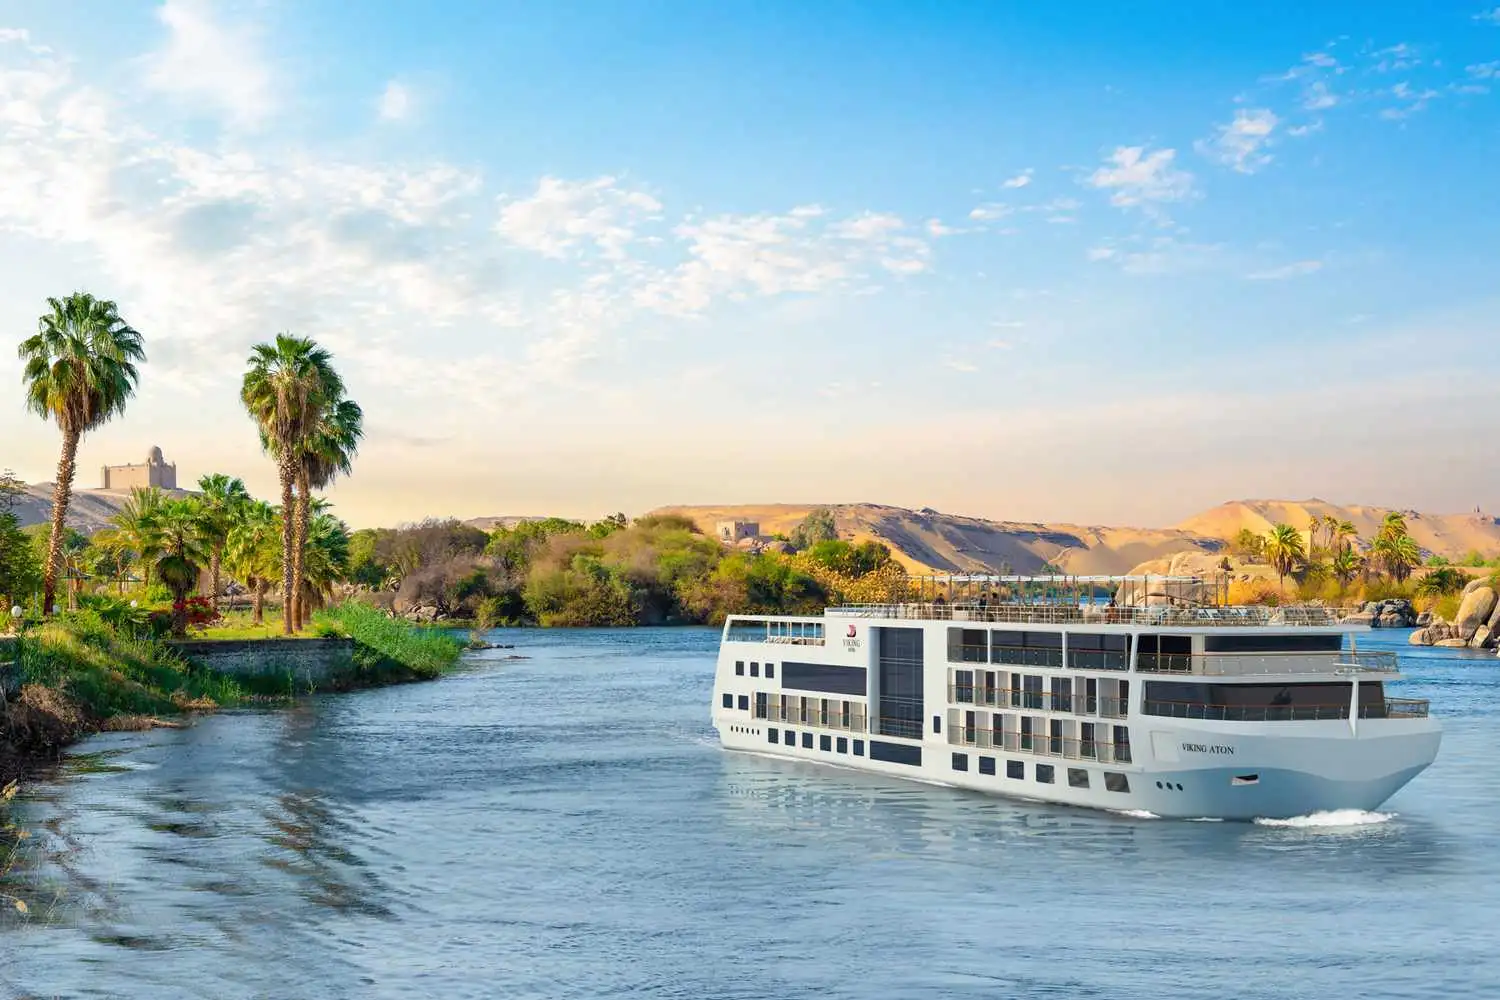 Cruising Down the Nile River